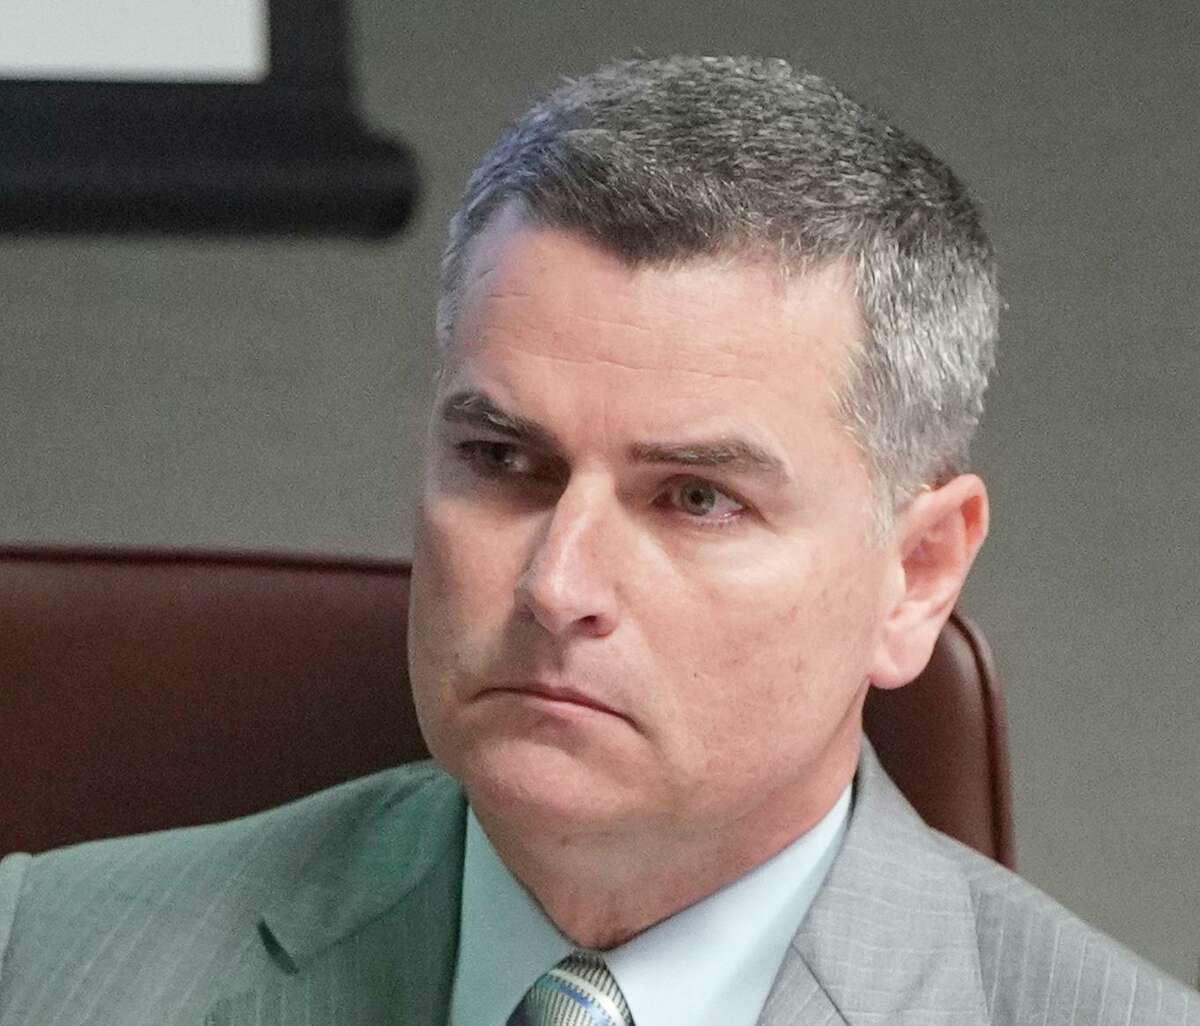 Former Harris County Department of Education board president Josh Flynn, shown here during a February 2019 meeting, sued to get on the Harris County Republican Party primary ballot for a state House seat. Following mediation, the party and Flynn announced he would be on the ballot, even thought county party Chairman Paul Simpson believes he remains ineligible.